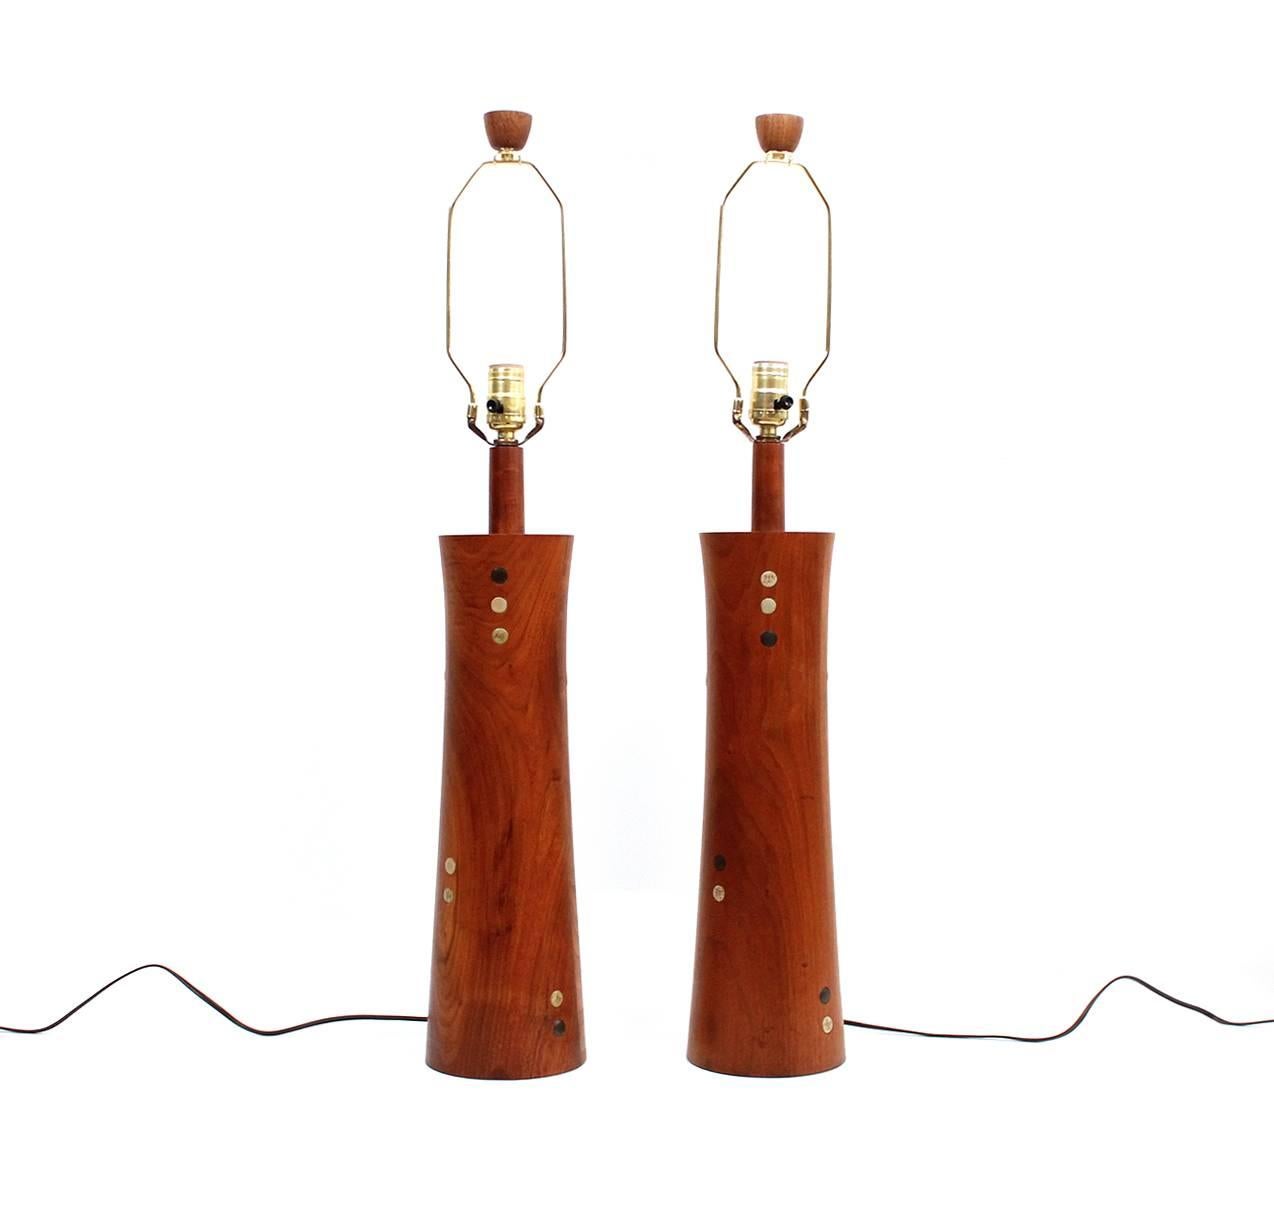 American Pair of Ceramic and Walnut Table Lamps by Martz